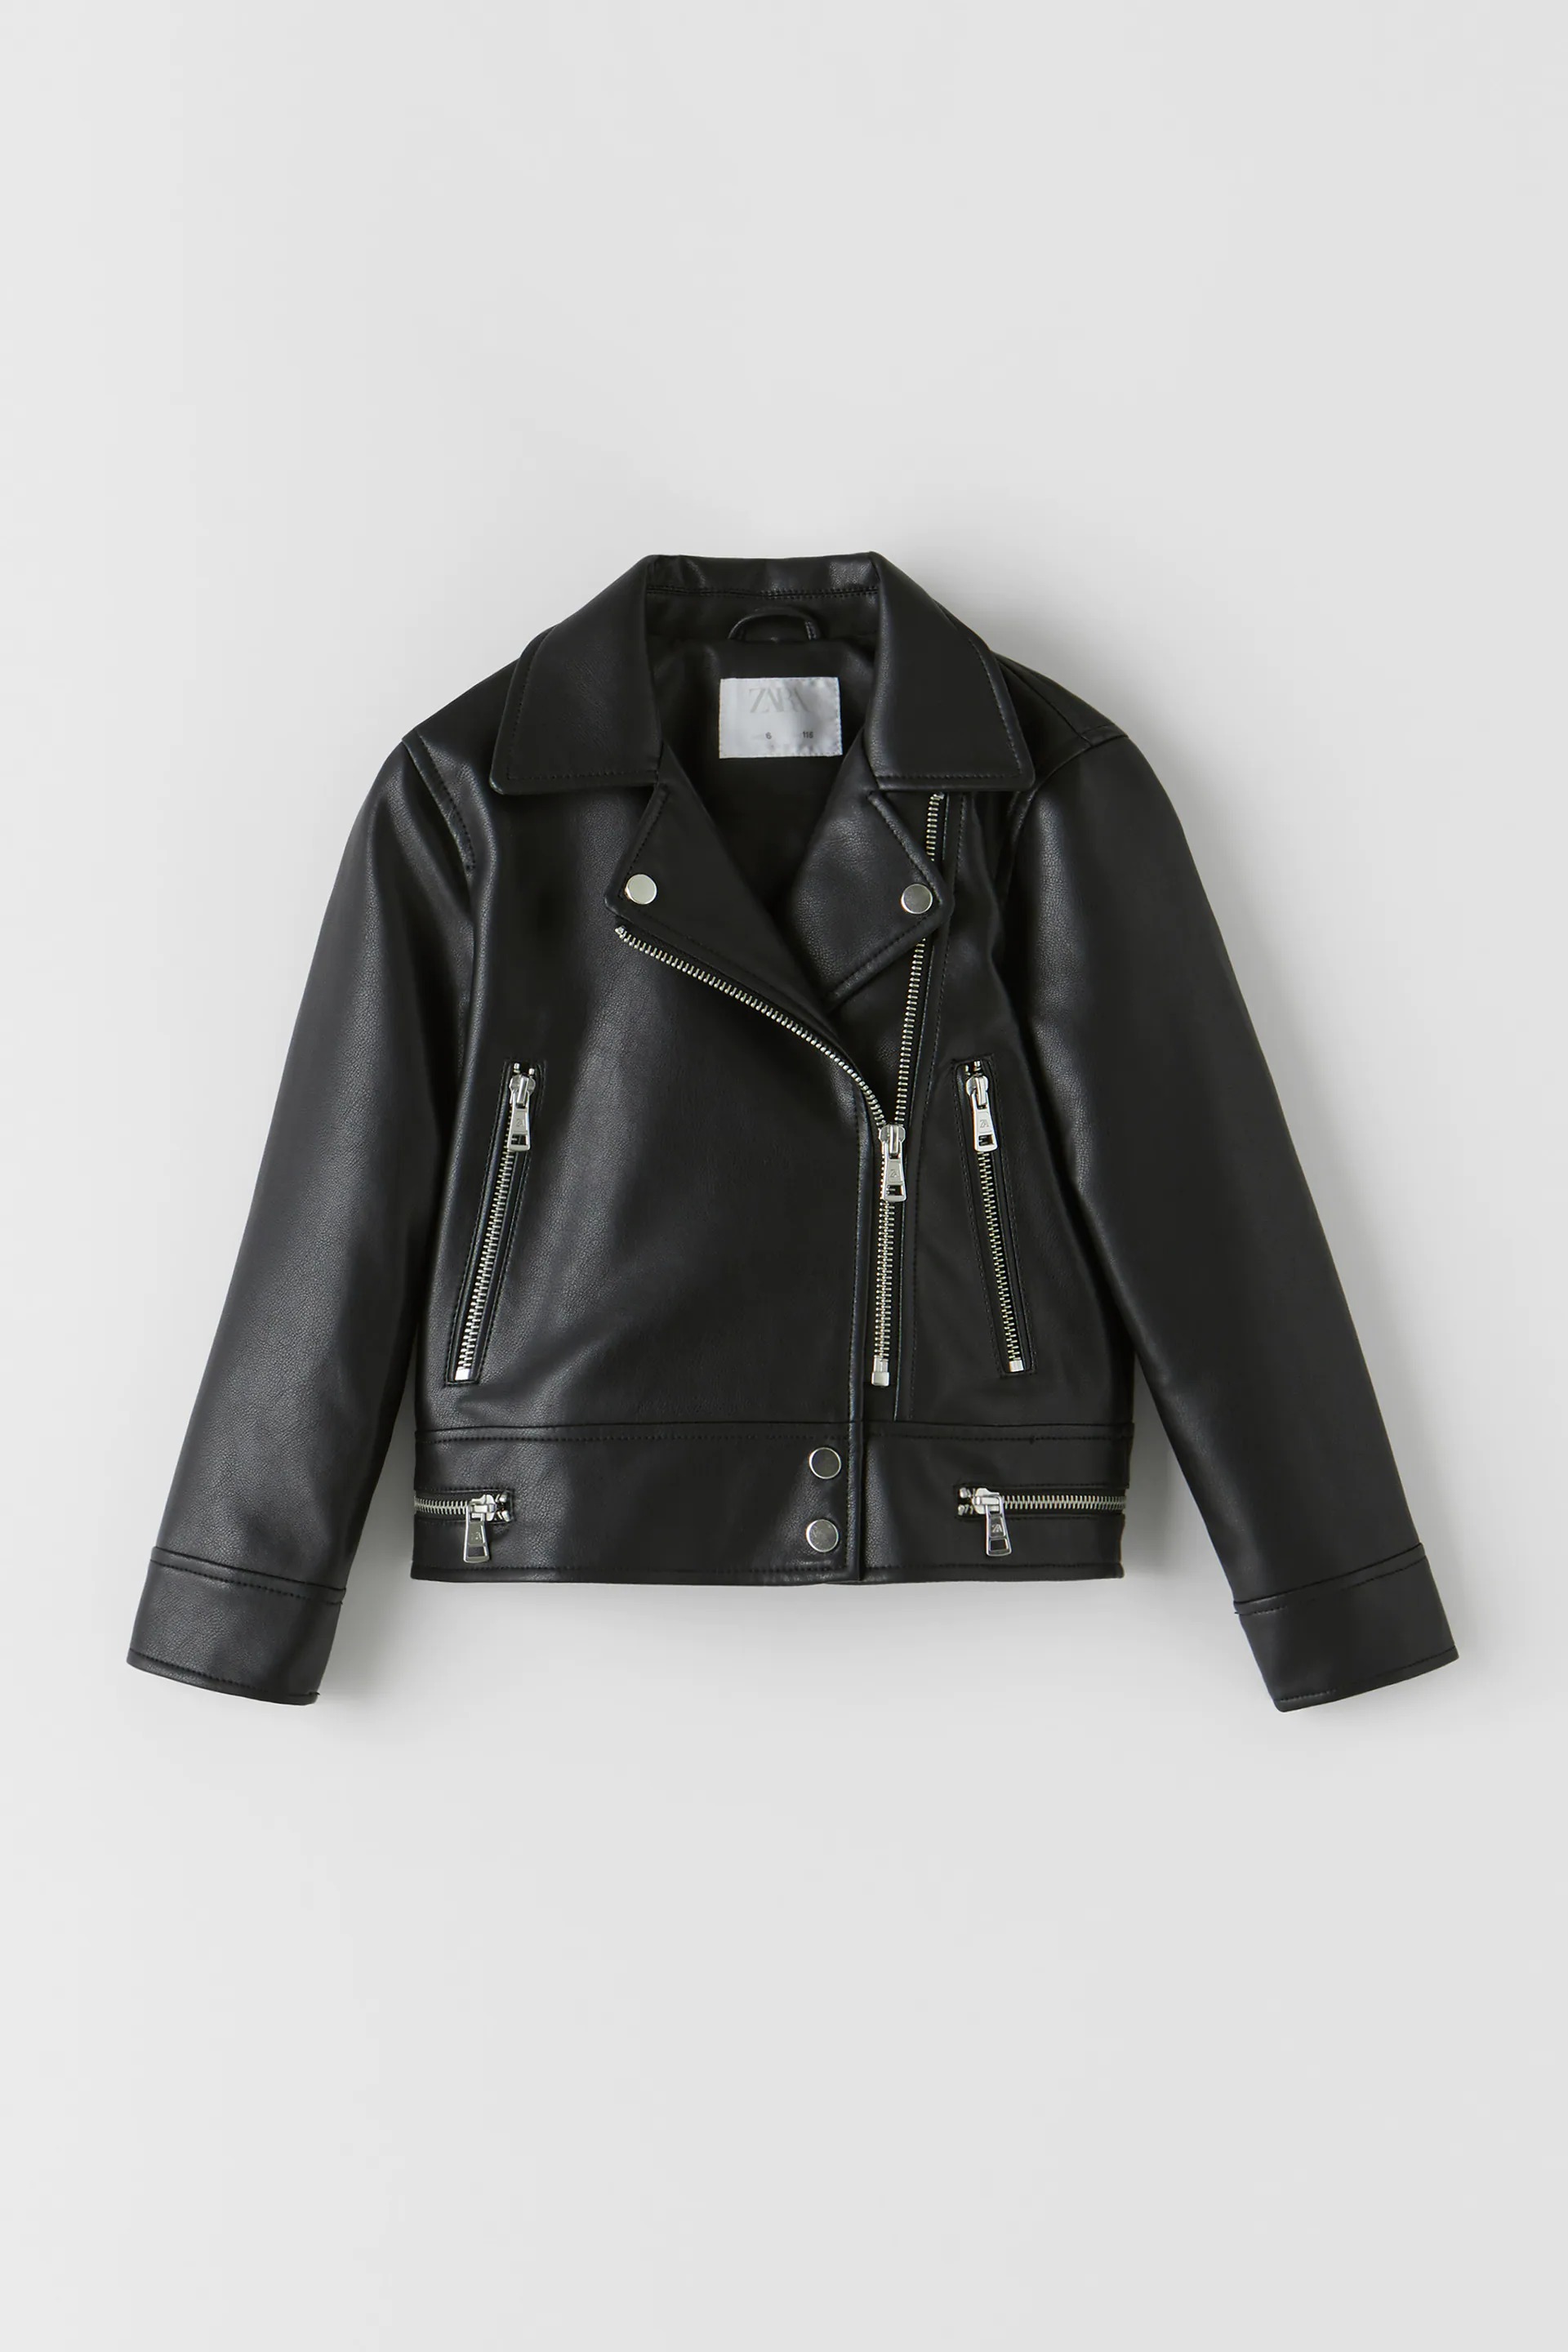 Could You Actually Go on a Vegan, Vegetarian or Pescatarian Diet? A faux leather jacket